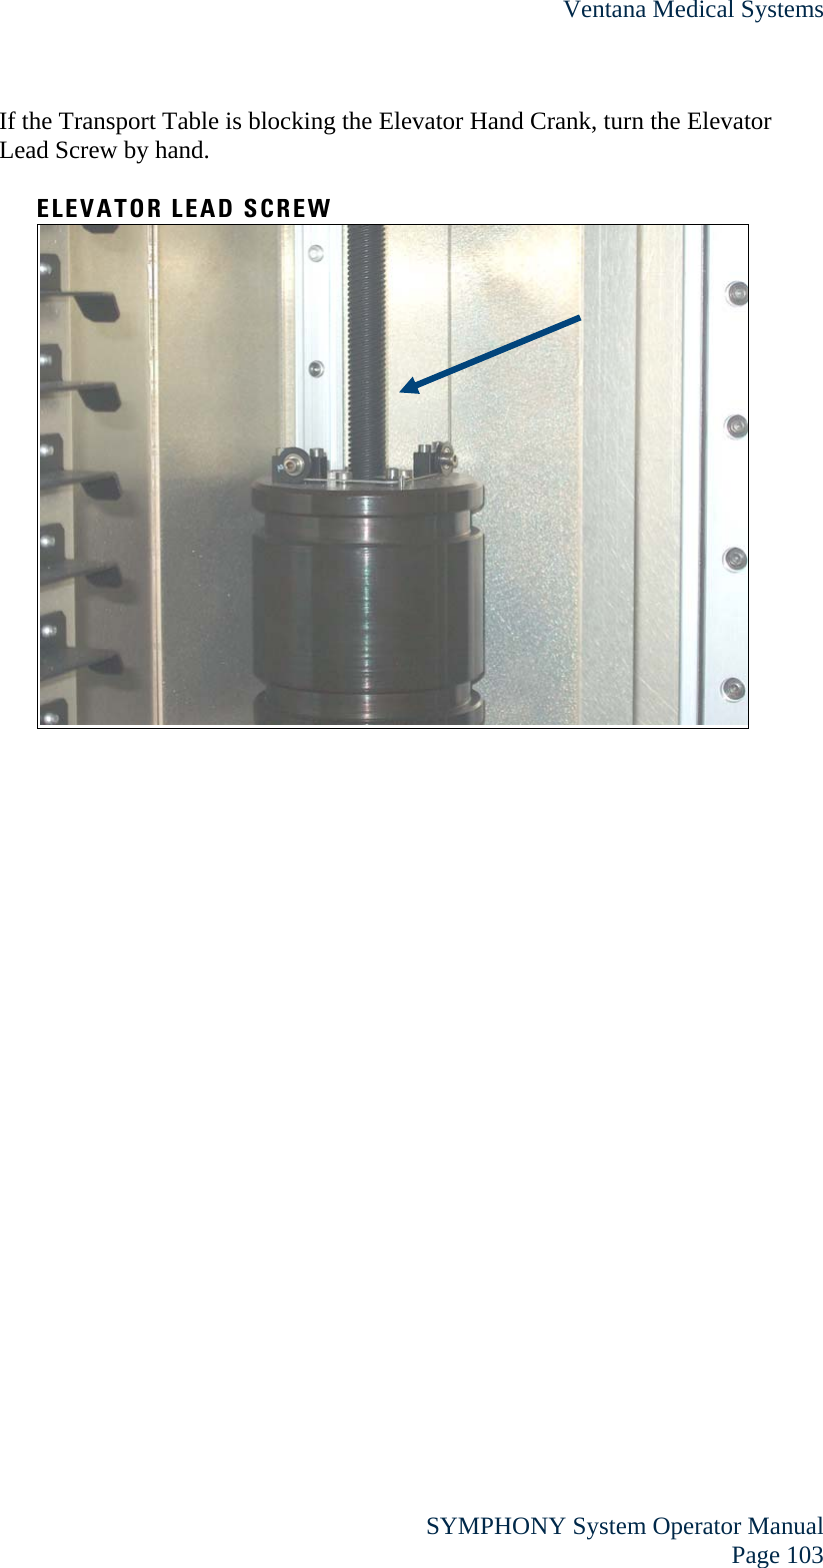 Ventana Medical Systems  SYMPHONY System Operator Manual Page 103 If the Transport Table is blocking the Elevator Hand Crank, turn the Elevator Lead Screw by hand.  ELEVATOR LEAD SCREW  